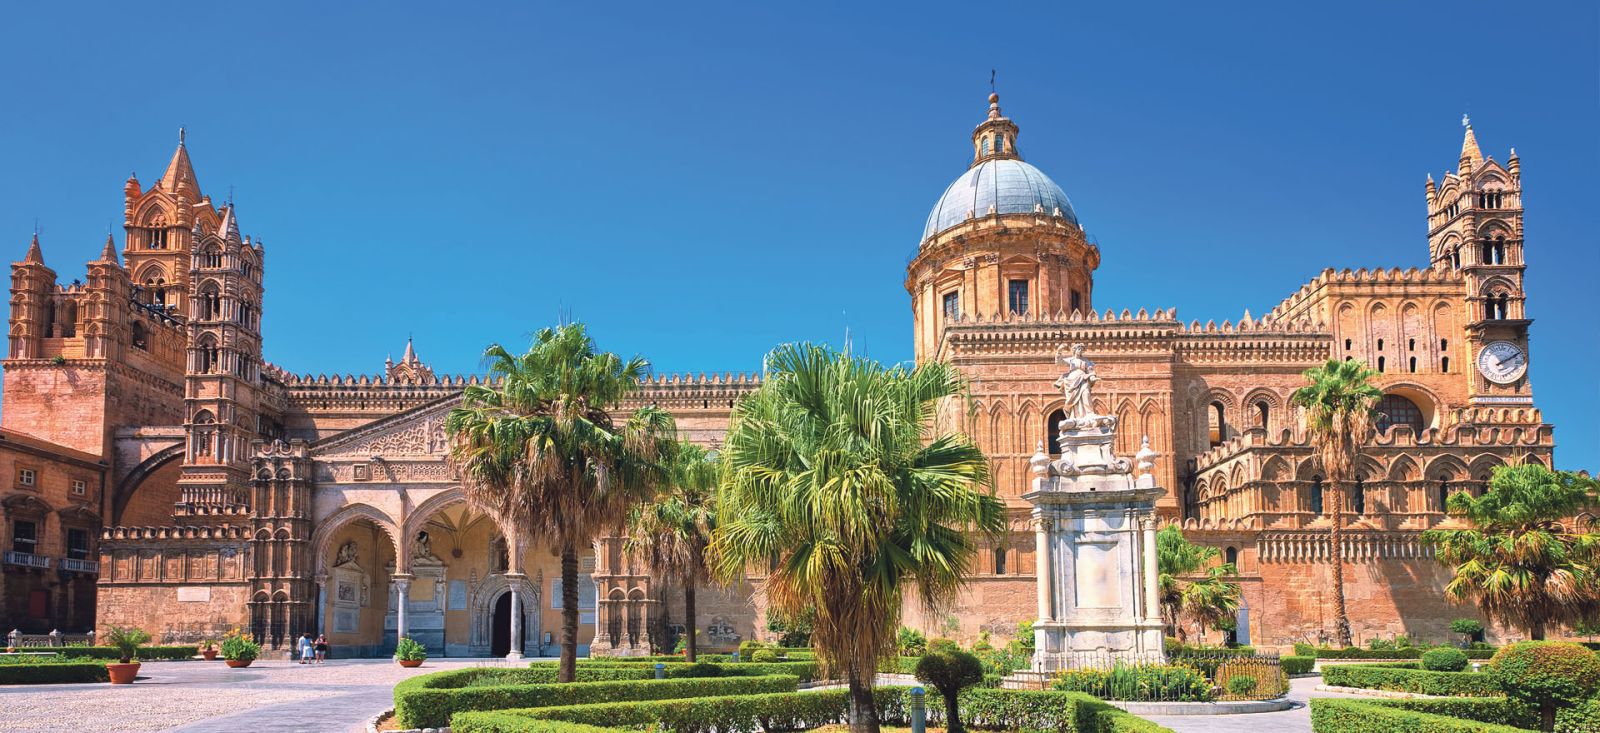 Palermo Cathedral and gardens against blue sky | Palermo, Sicily